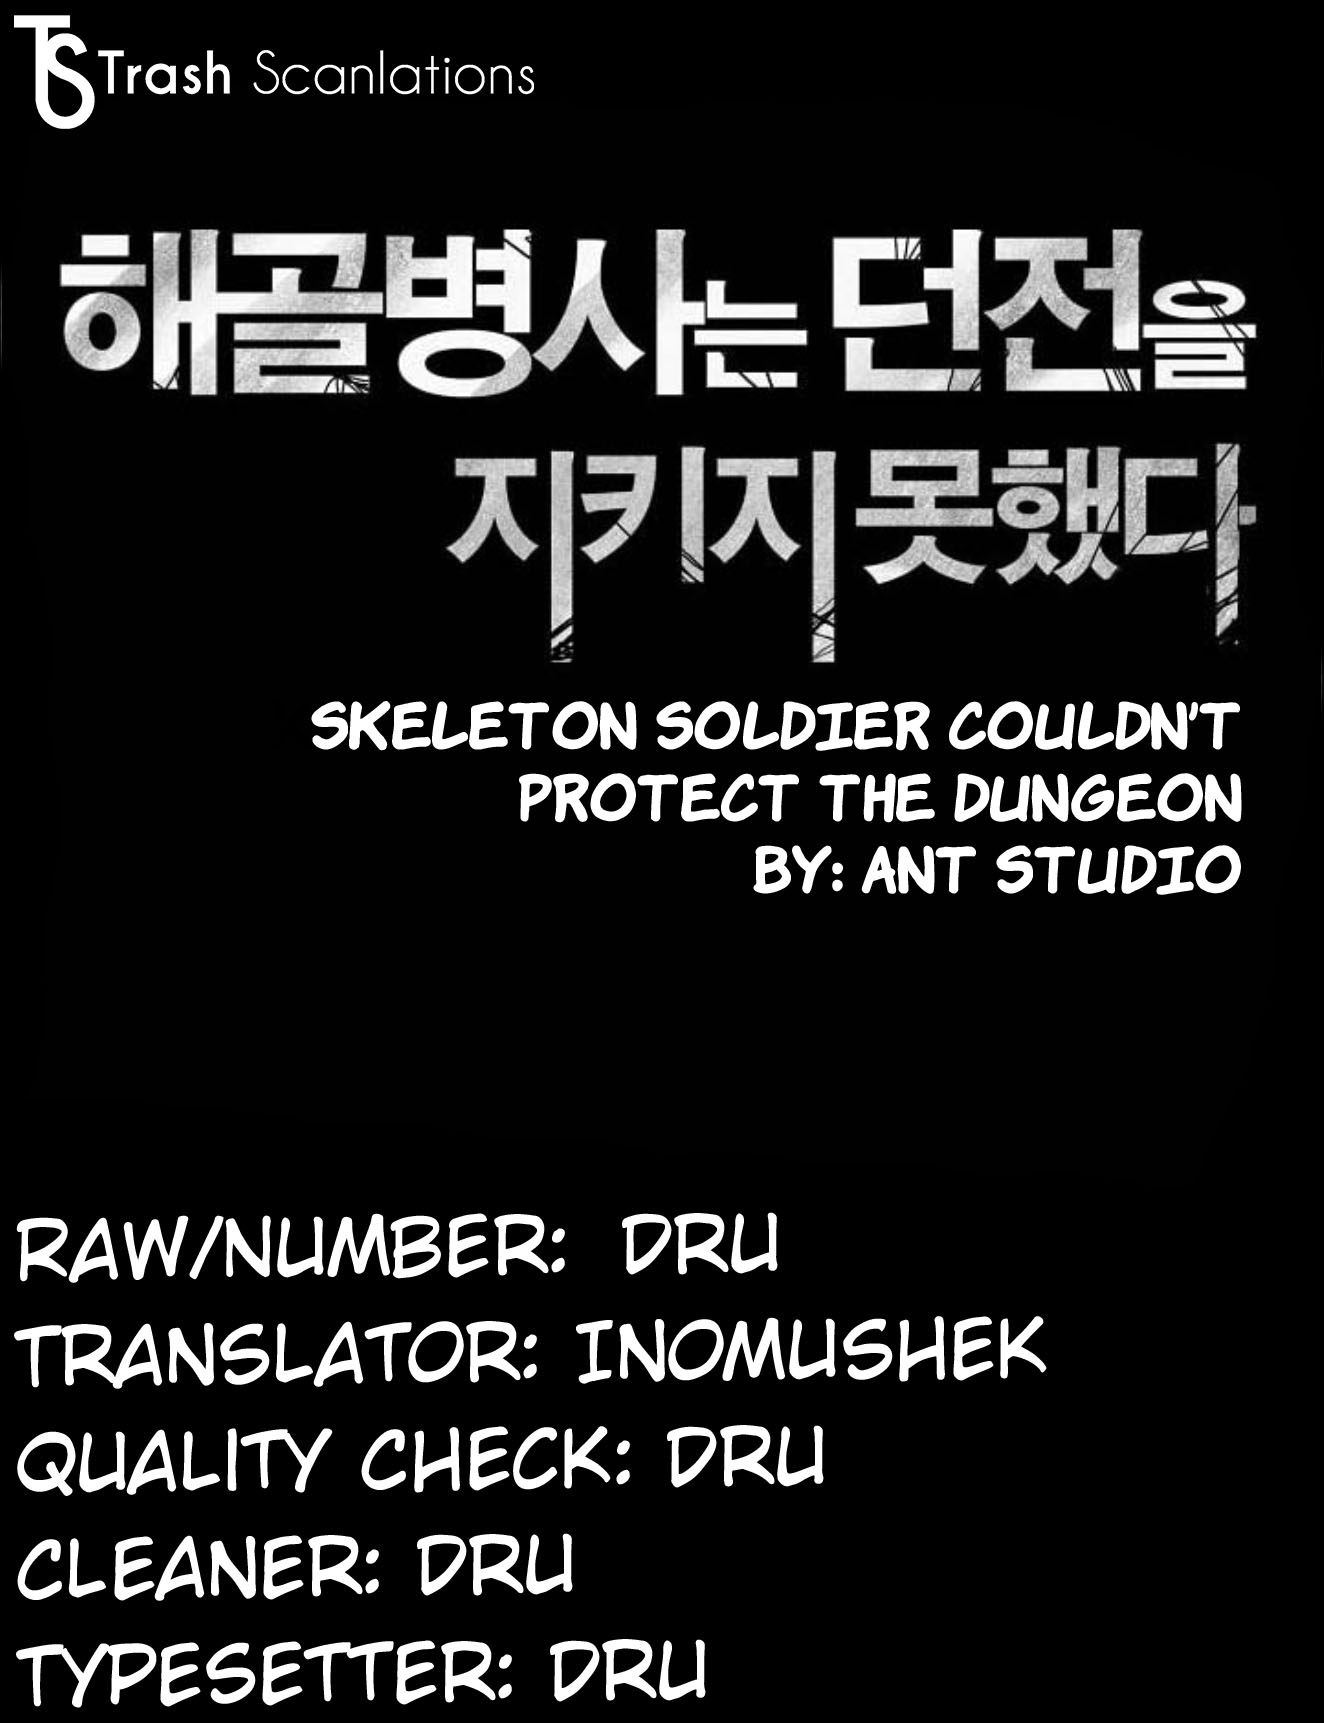 Skeleton Soldier Couldn't Protect the Dungeon - Chapter 2934 - Image 1